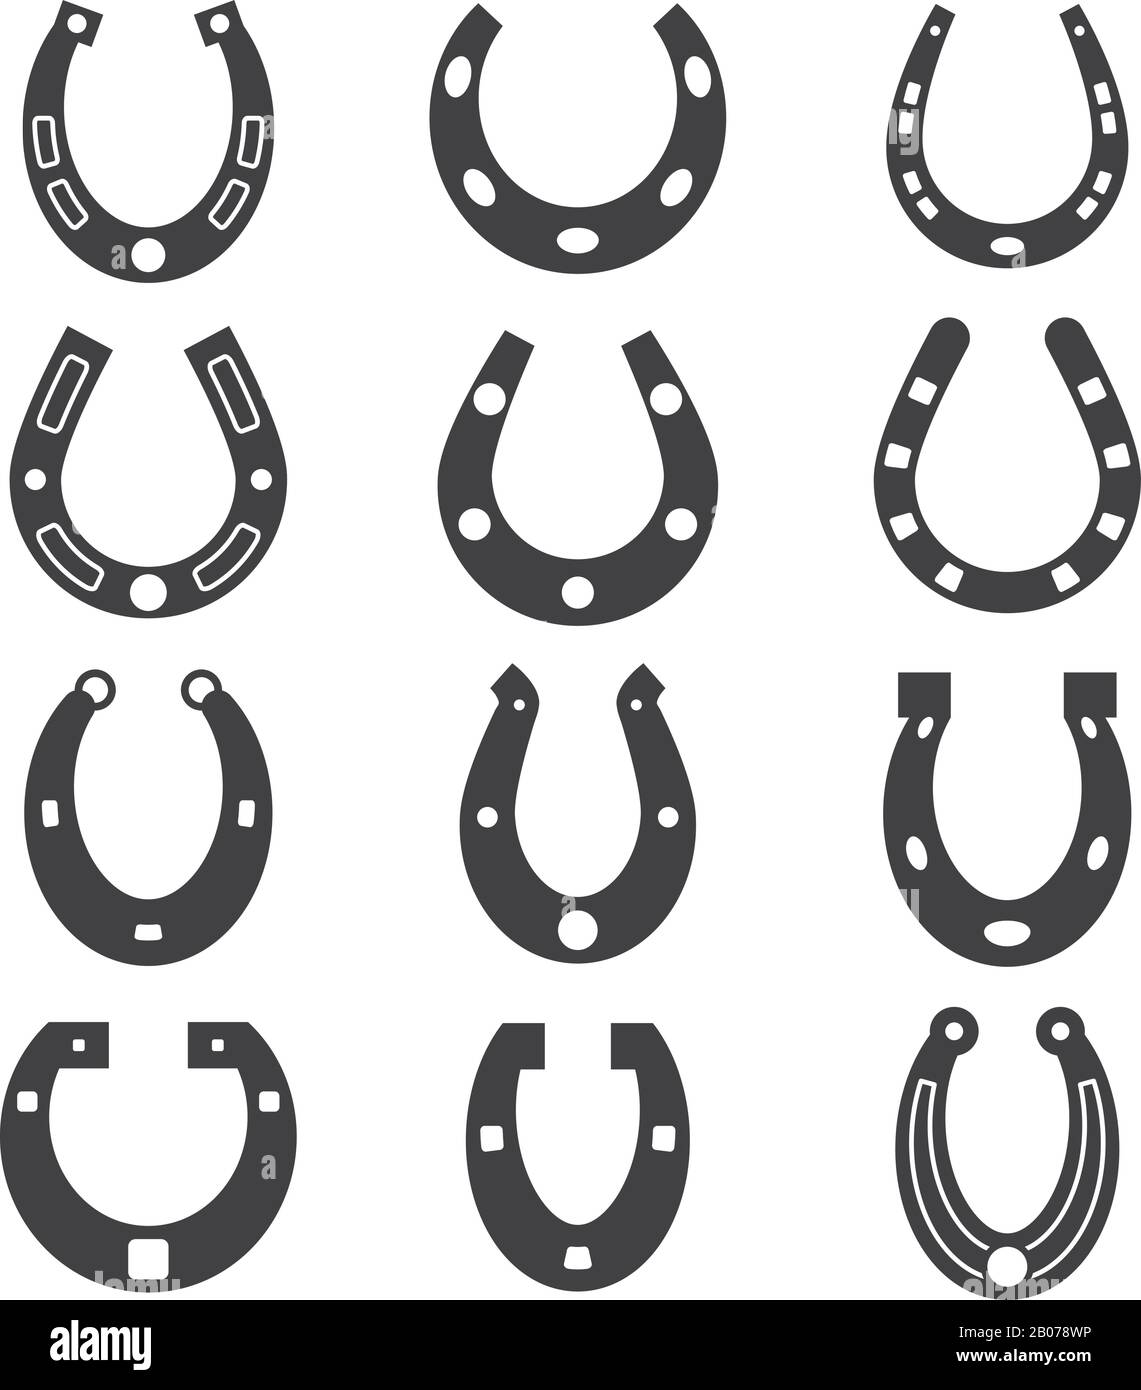 Horseshoe vector icons, lucky symbols set. Ssilhouette of horse shoe illustration Stock Vector